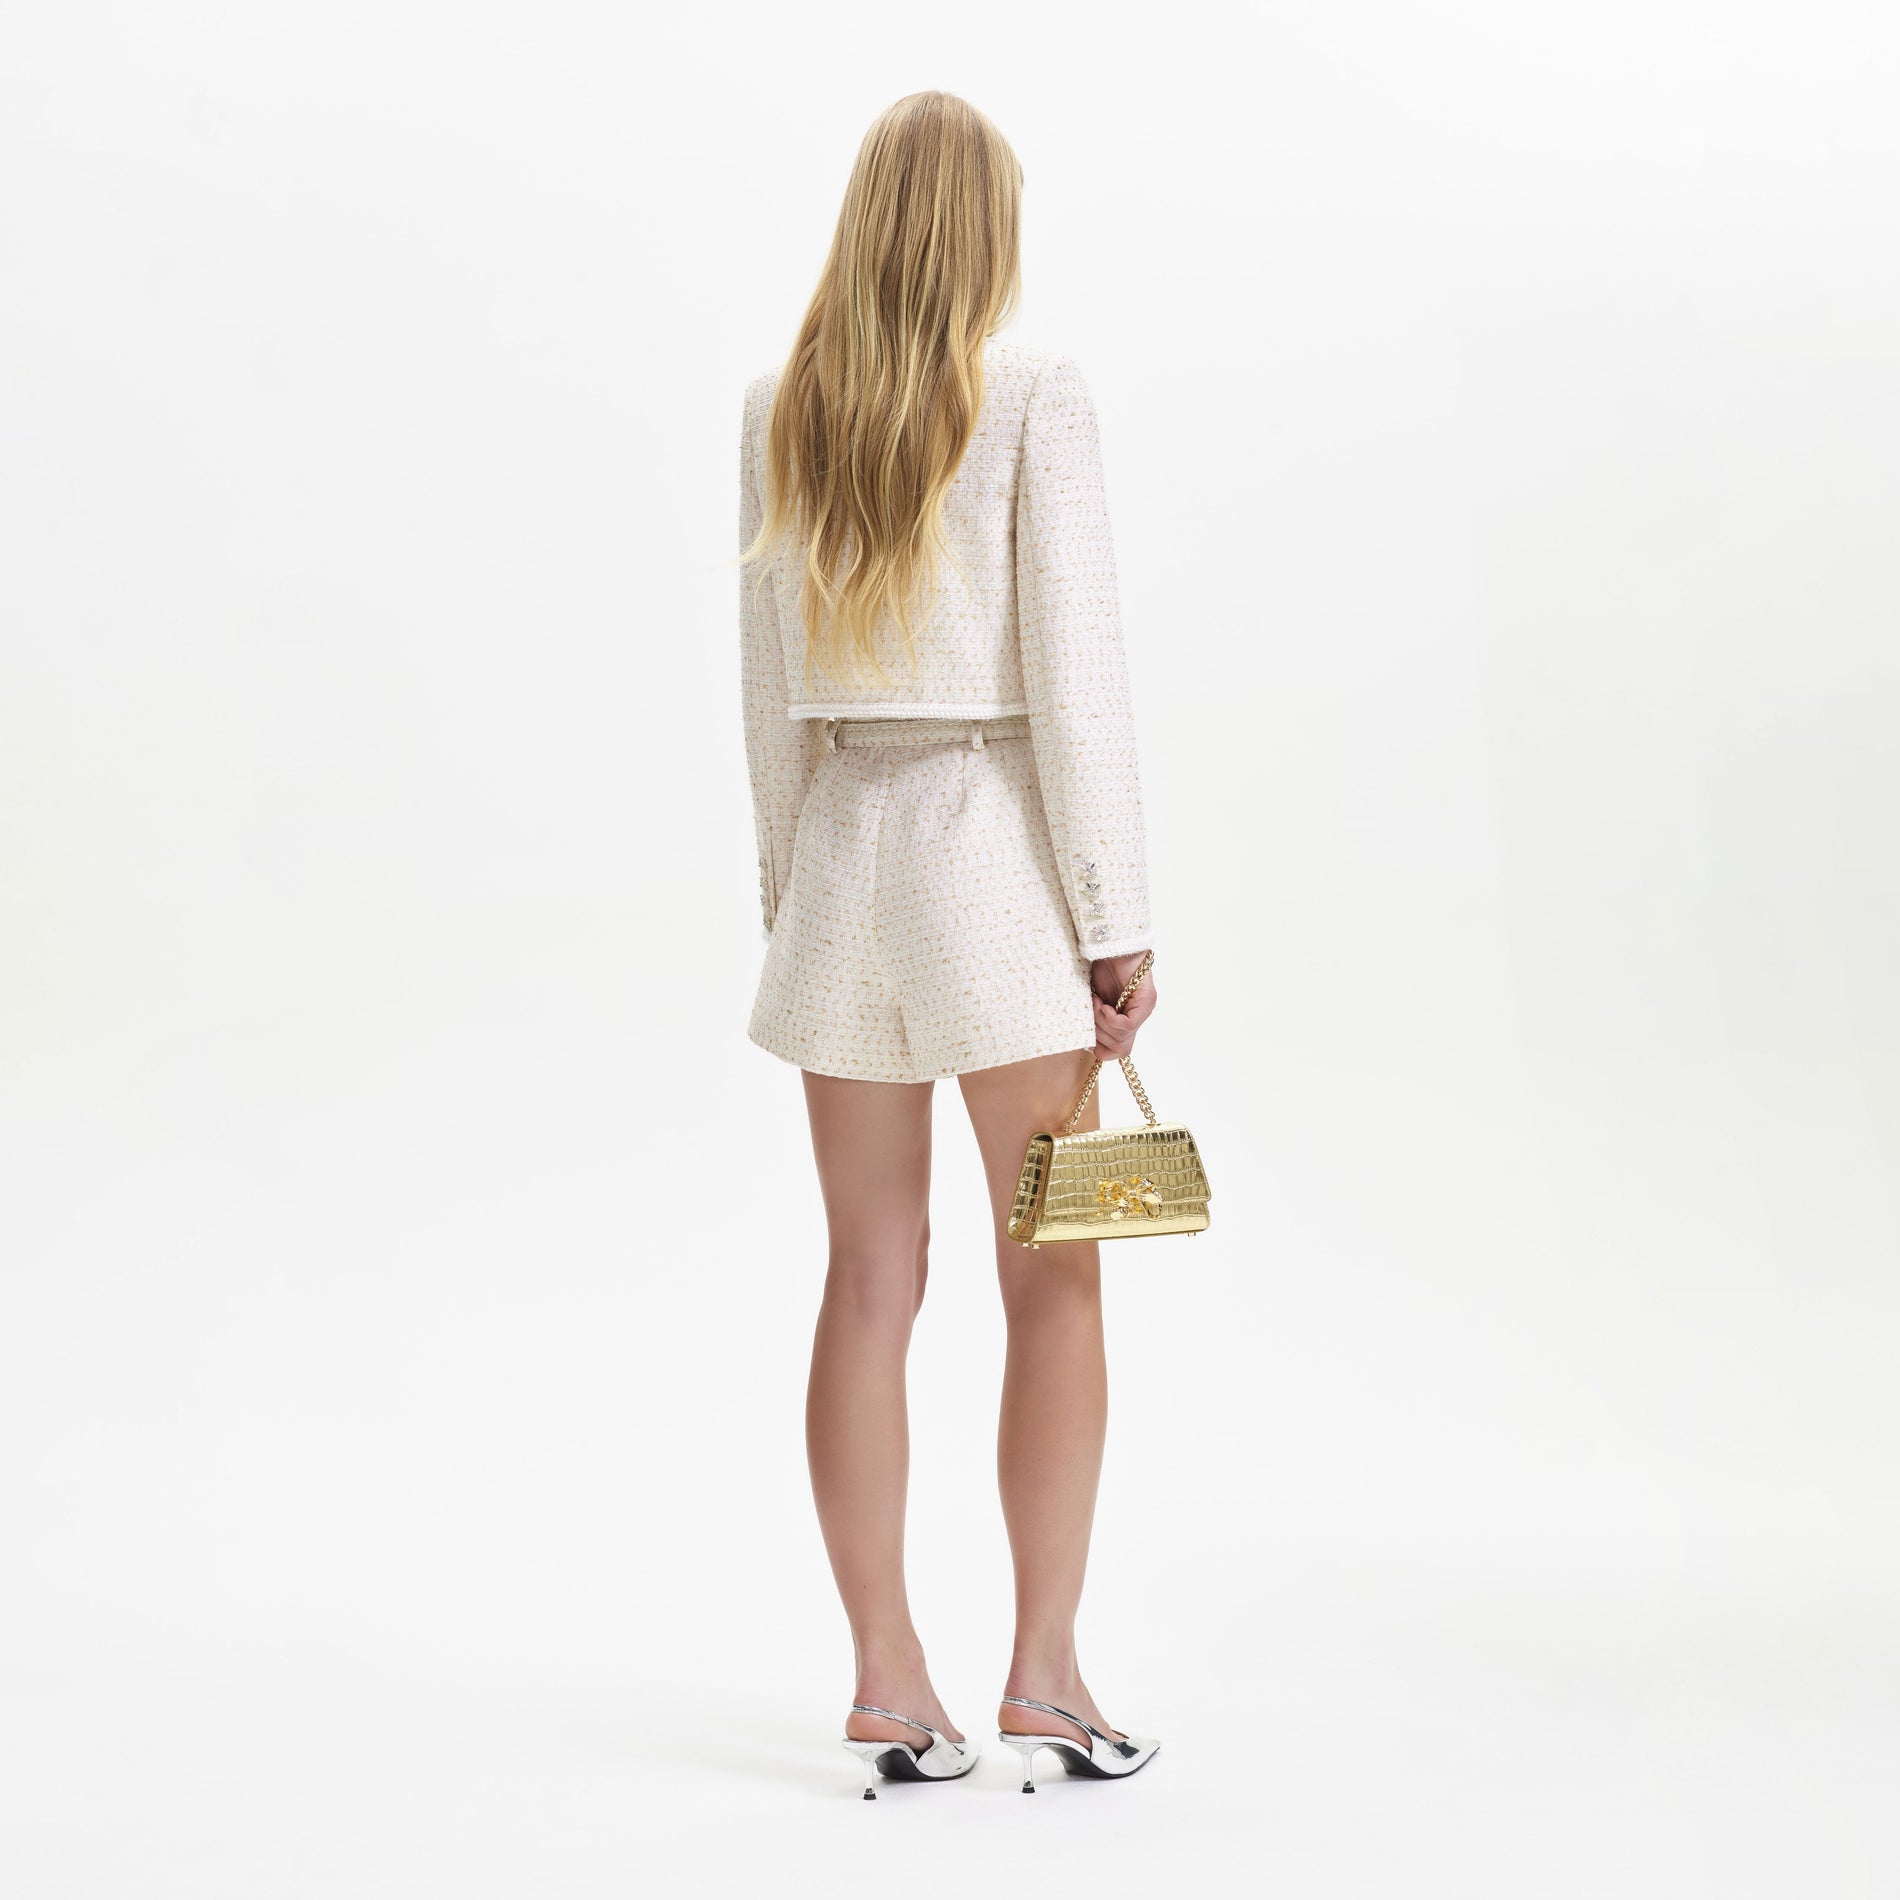 A woman wearing the Cream Boucle Short